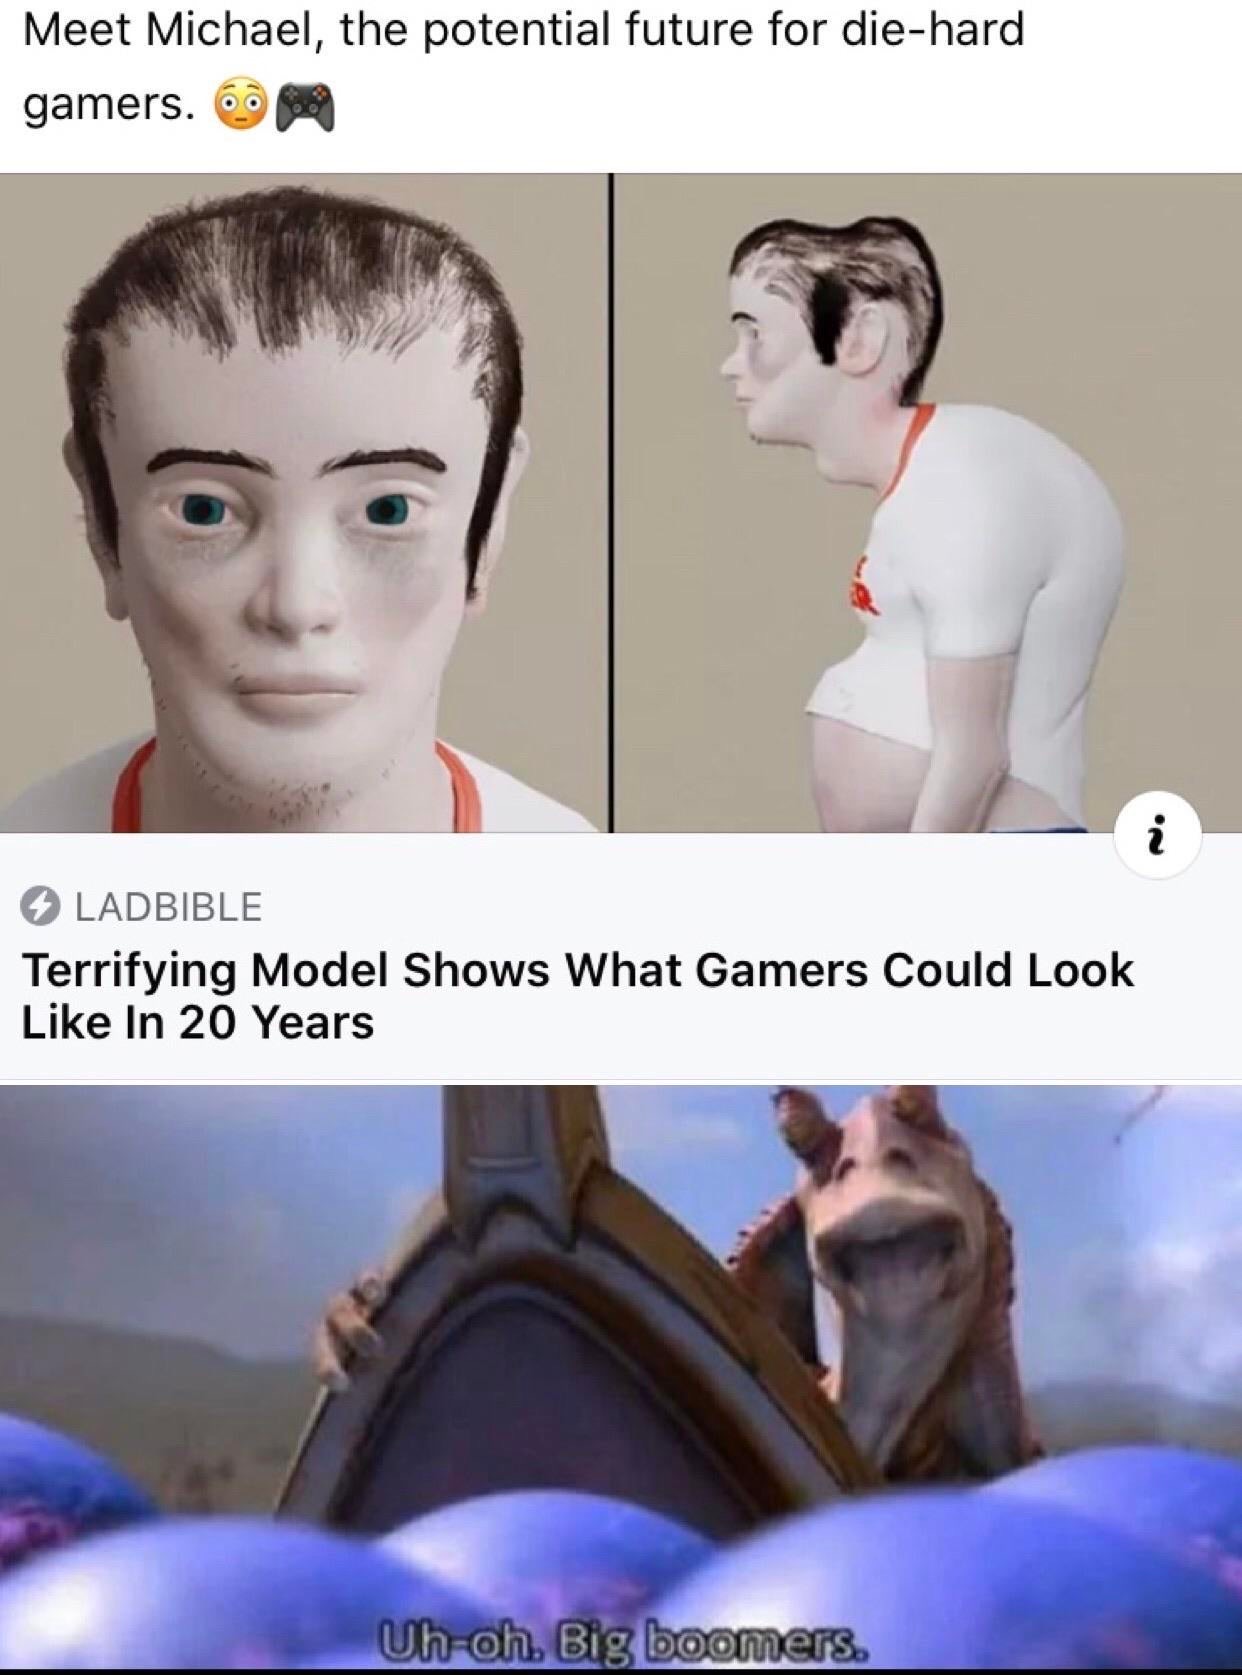 uh oh big boomers meme - Meet Michael, the potential future for diehard gamers. 68 Ladbible Terrifying Model Shows What Gamers Could Look In 20 Years Uhoh, Big boomers.